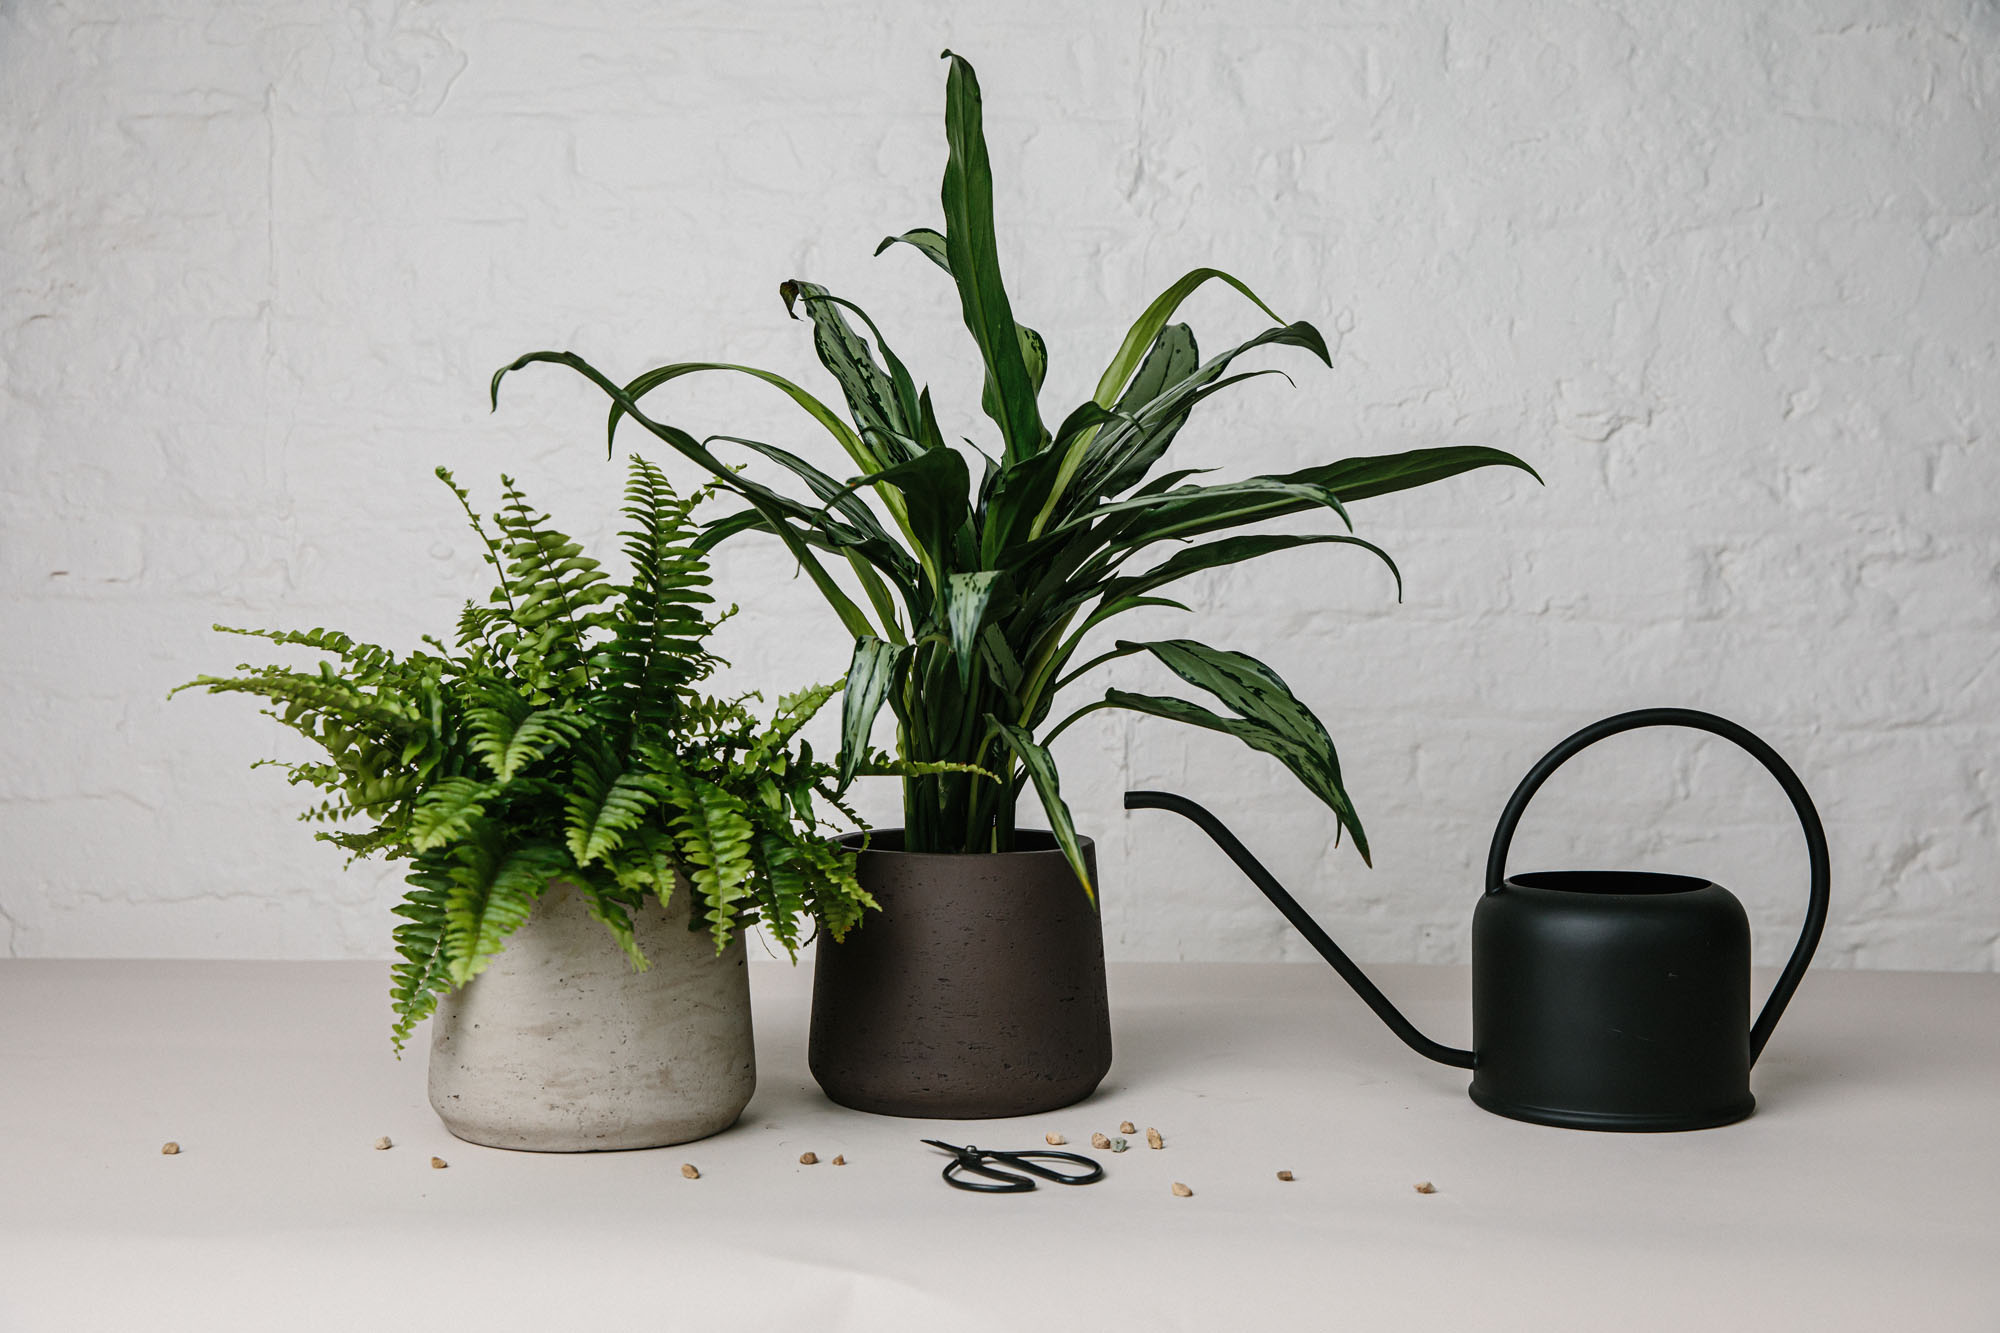 plants, watering can and scissors on table